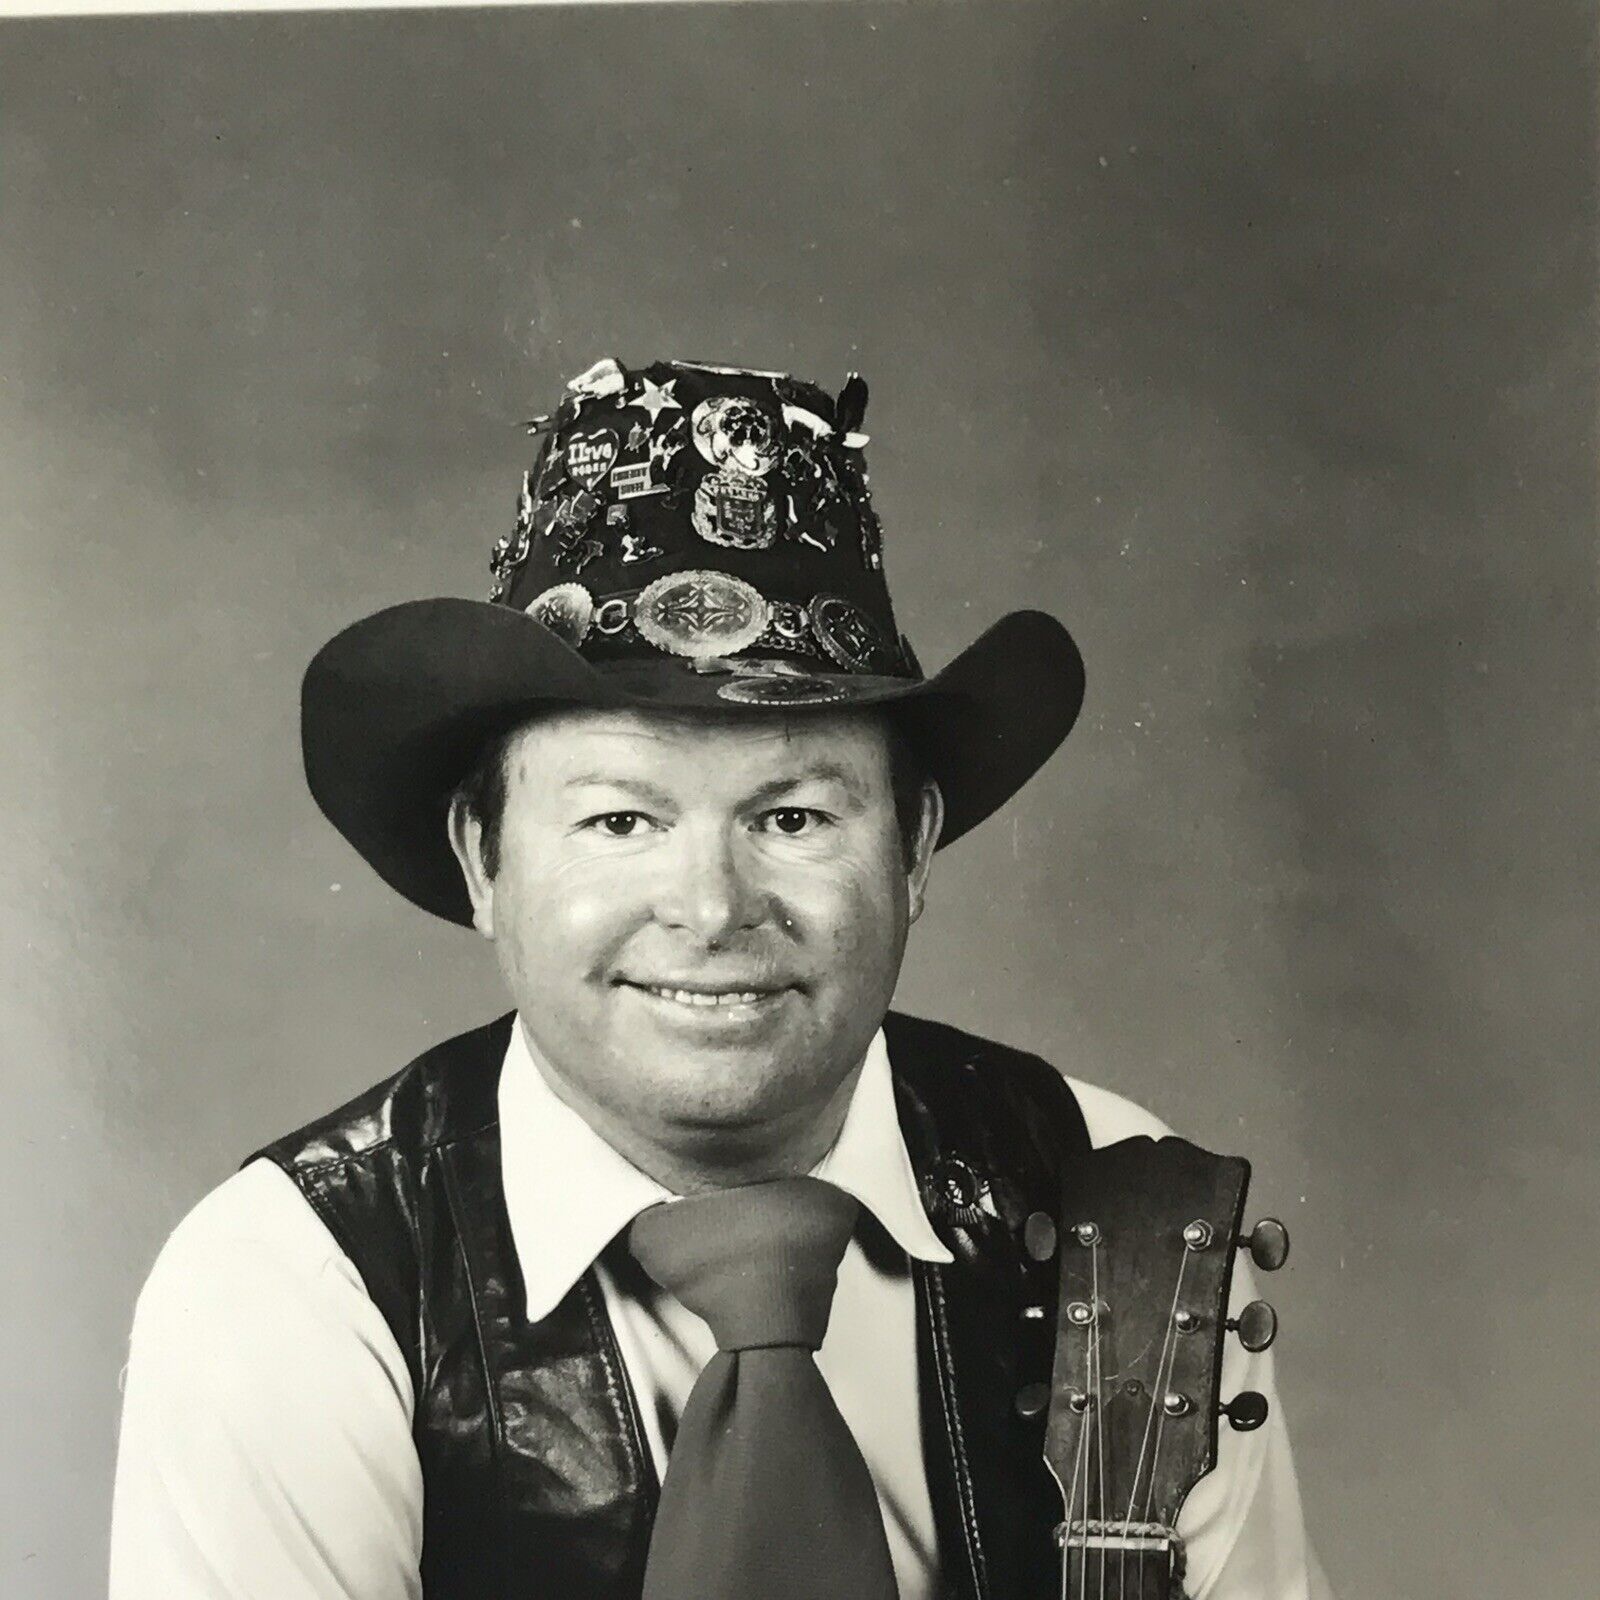 Vintage Black and White Photo Cowboy Holding Guitar 5 x 3.5 Inches